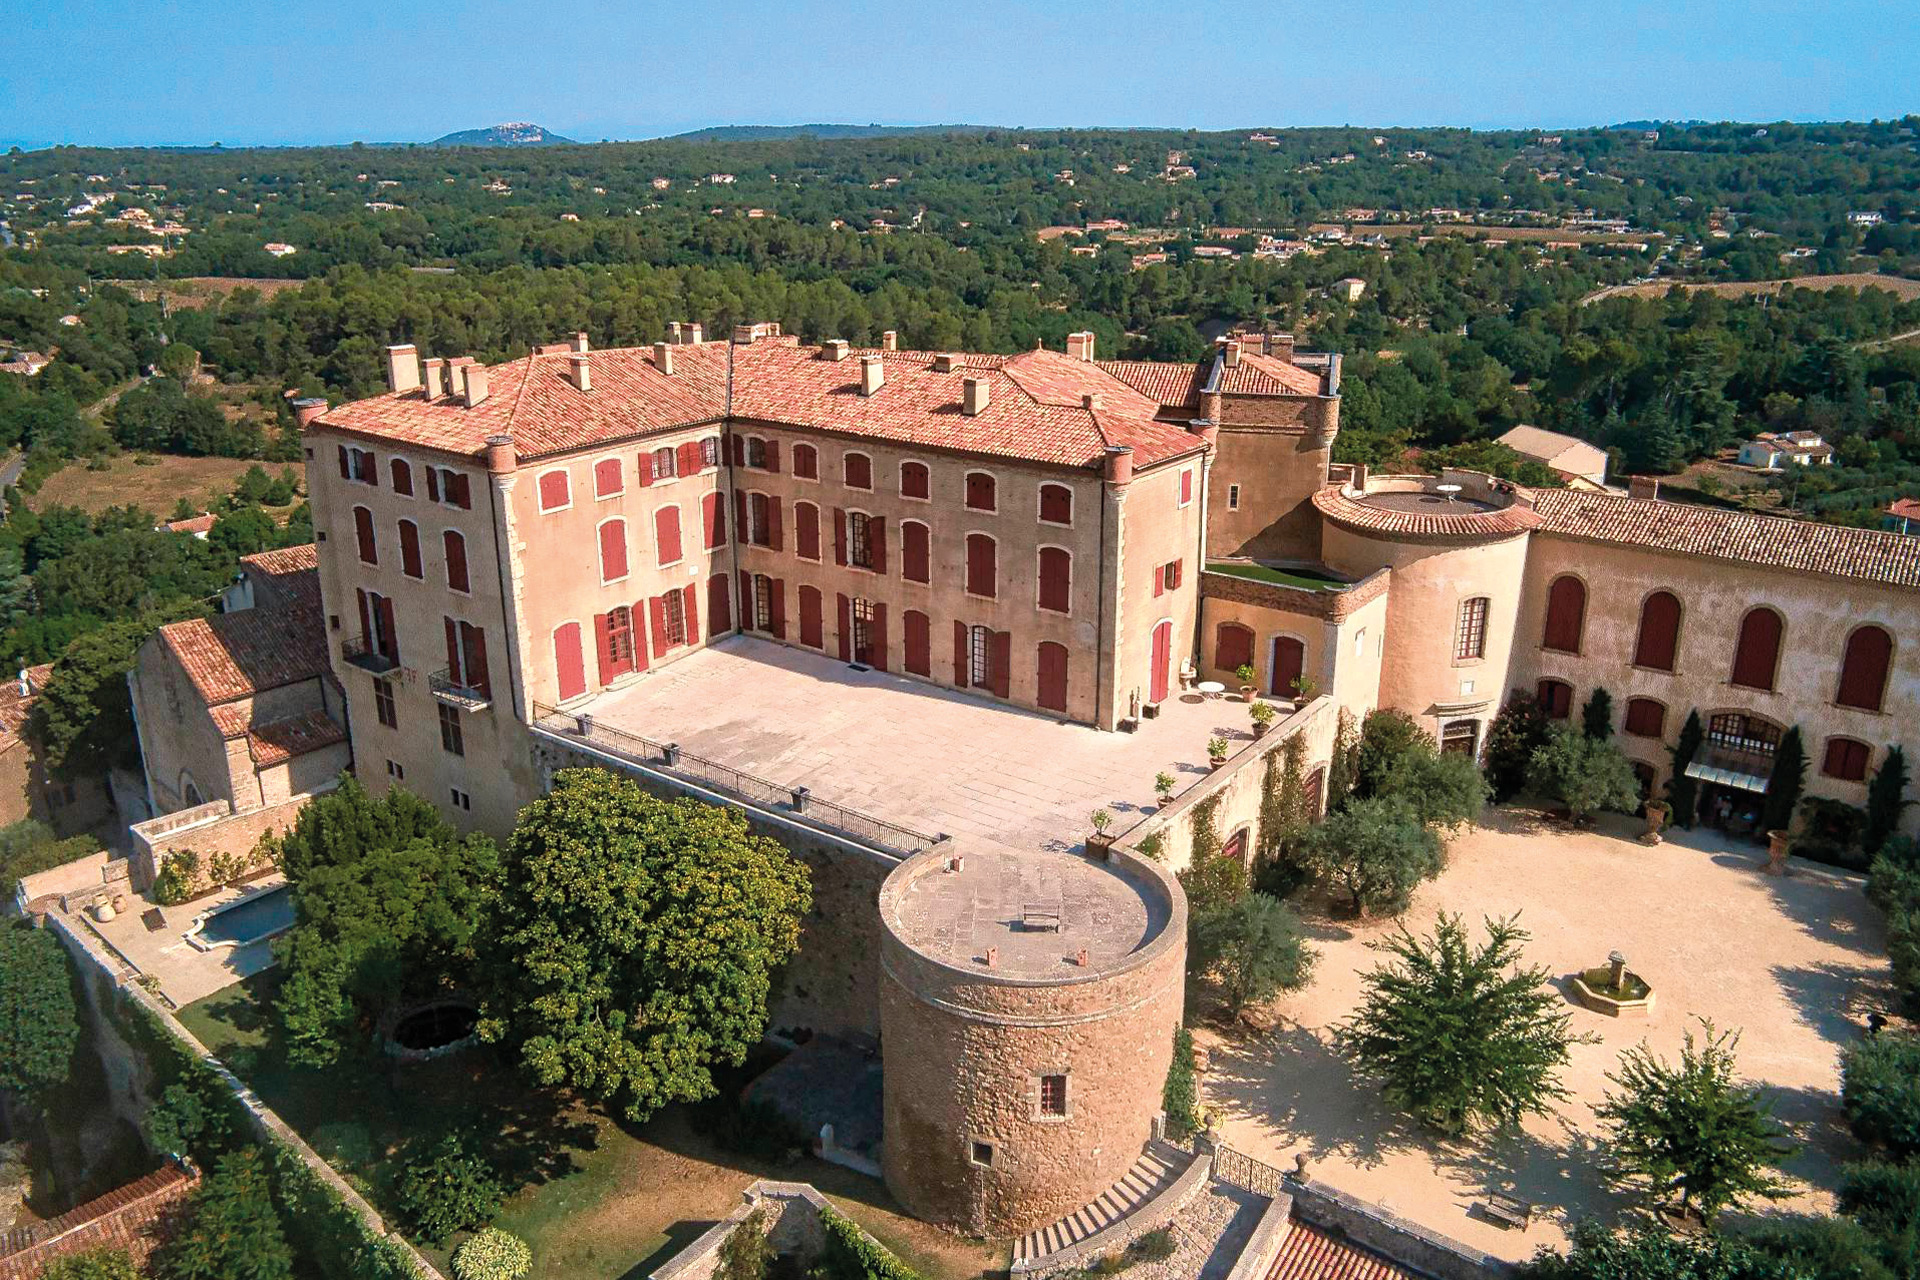 Chateau in Provence with large courtyards and greenery beyond